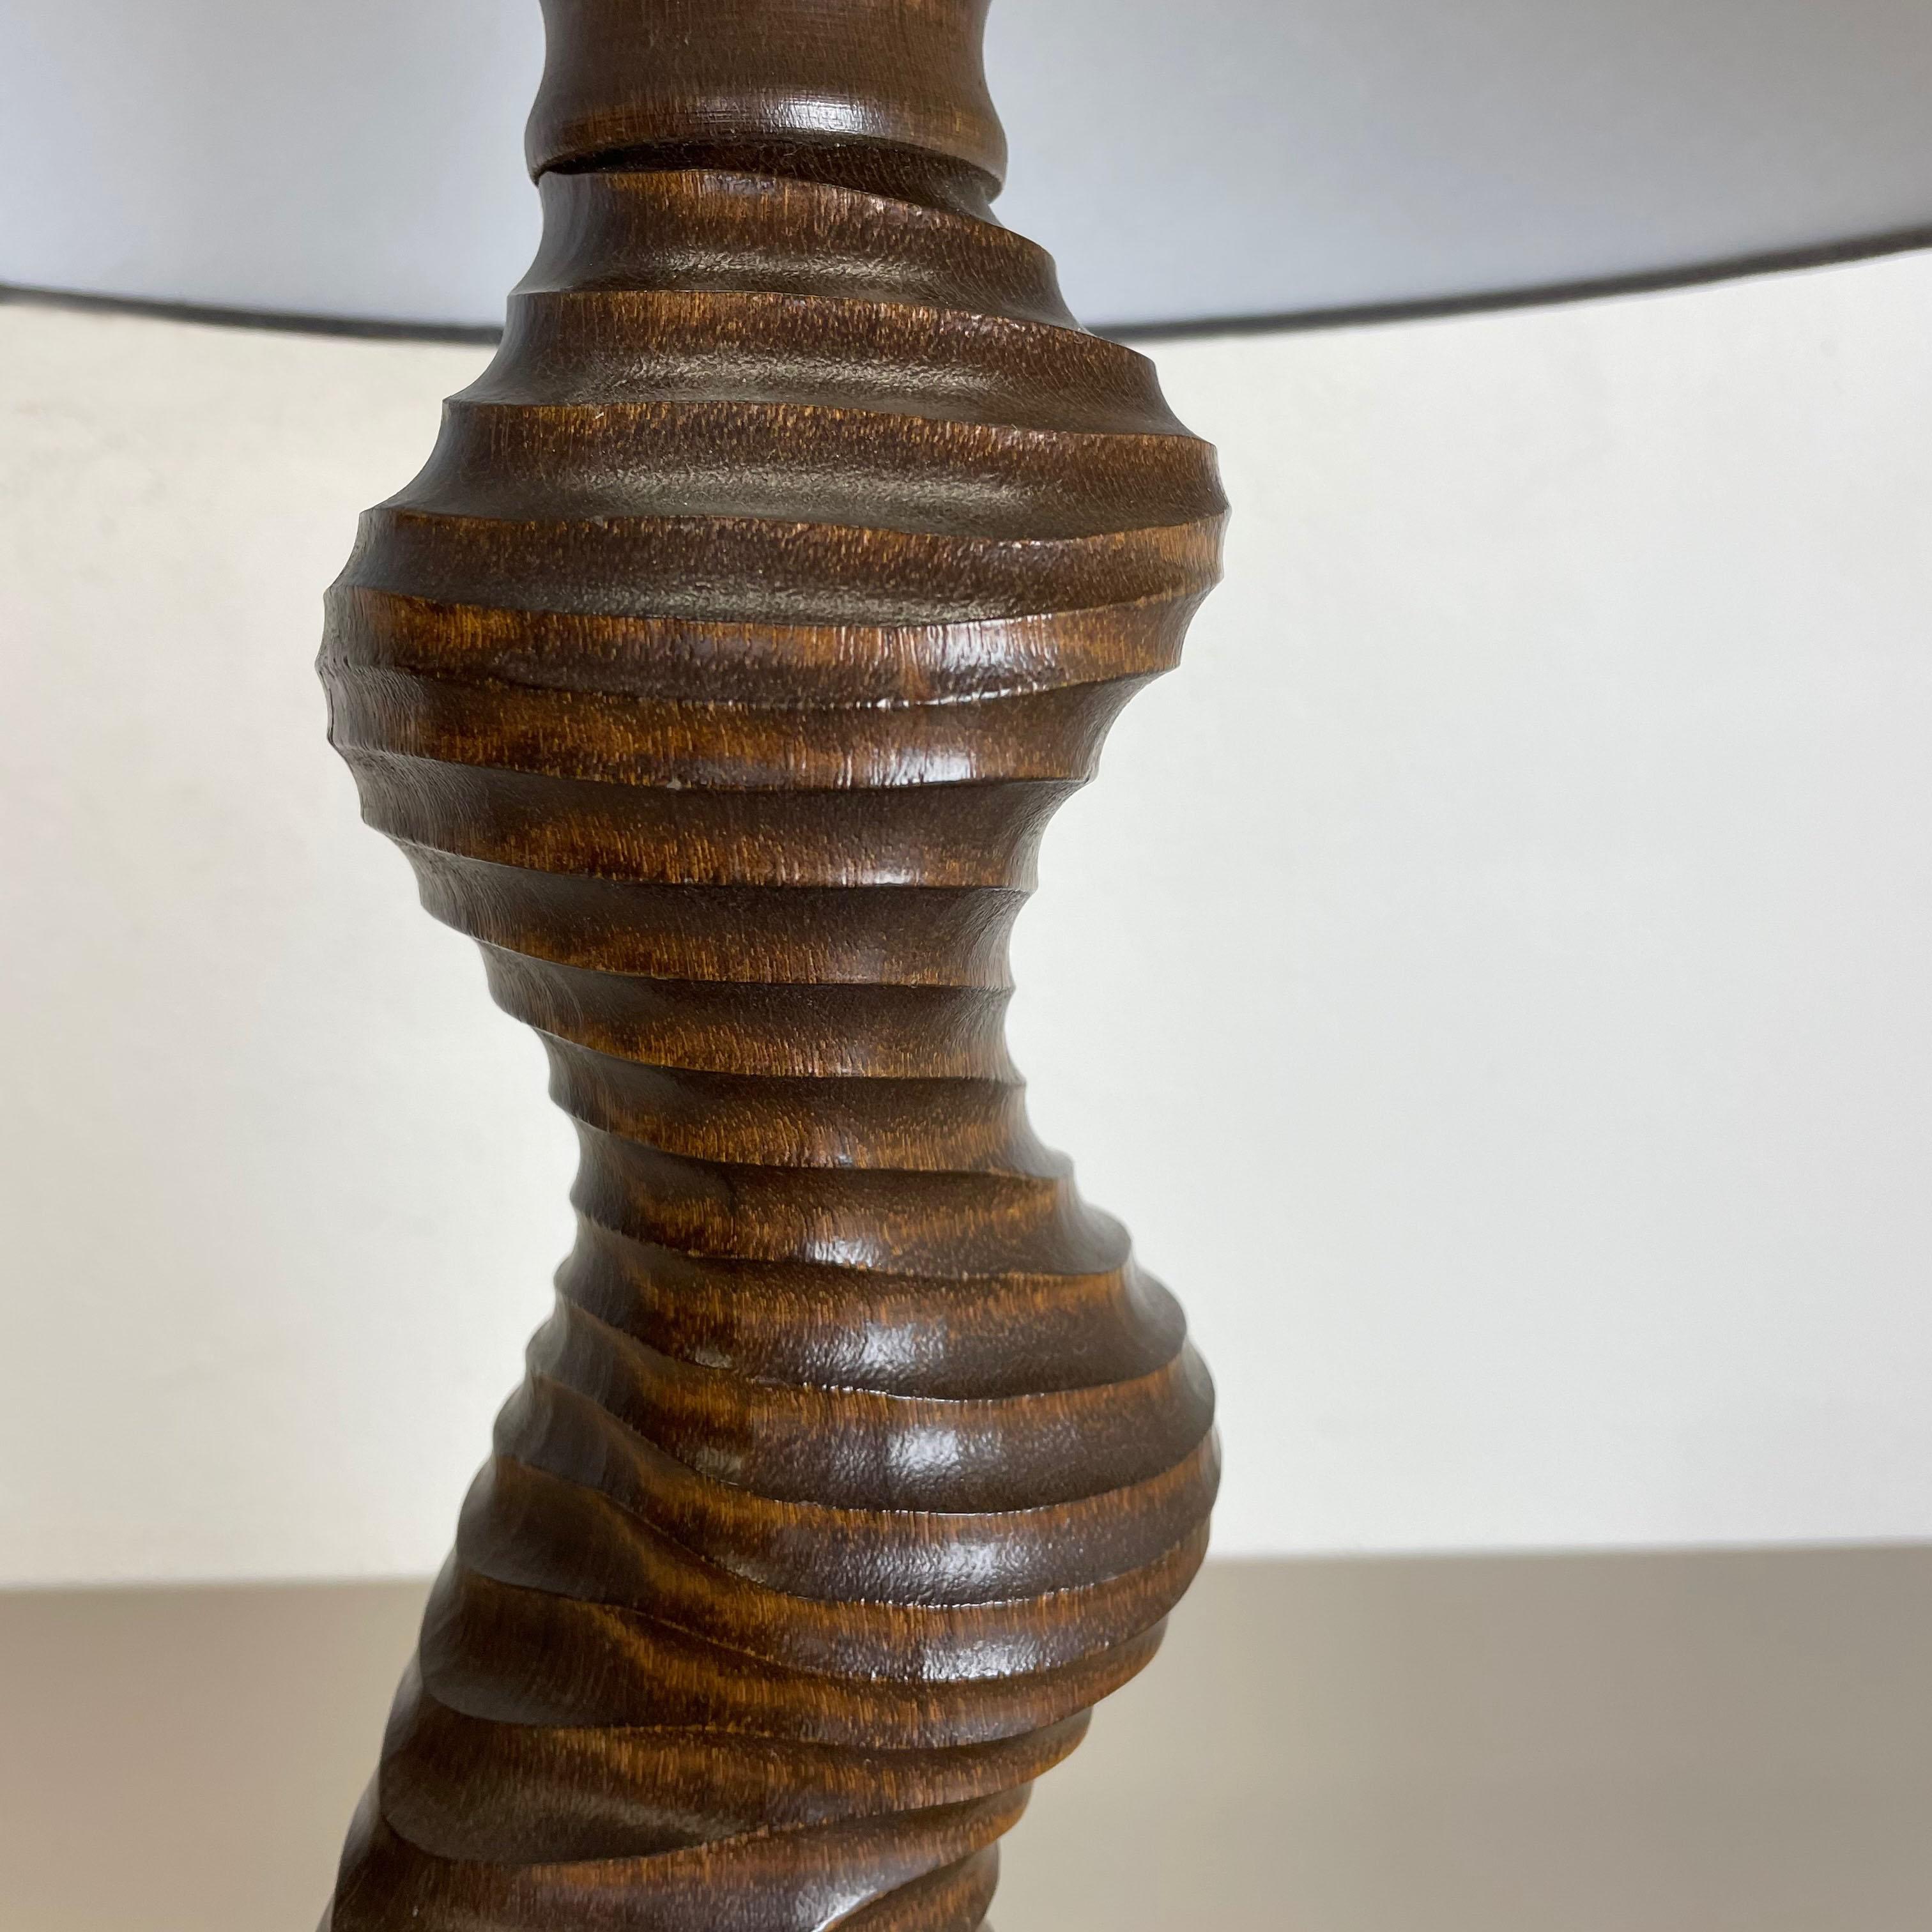 Large Organic Sculptural Wooden Table Light Made Temde Lights, Germany, 1970s For Sale 2